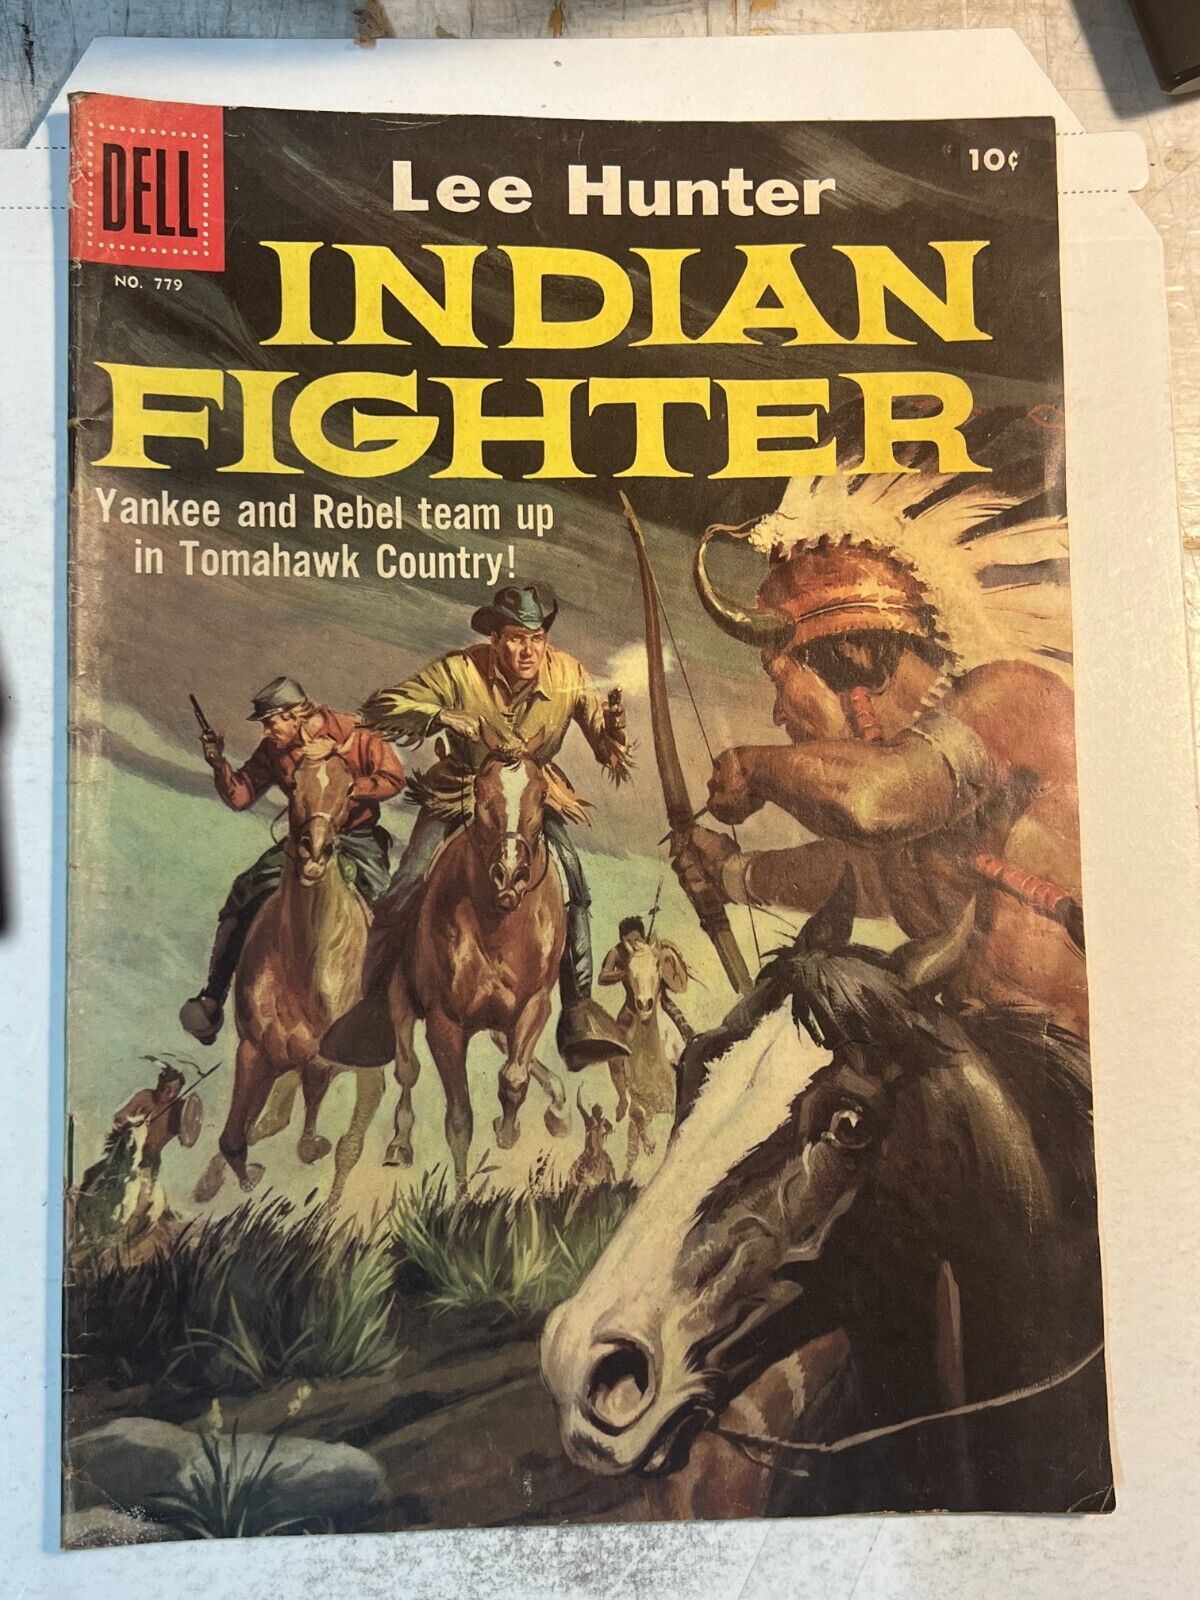 Lee Hunter, Indian Fighter #779 (1957 Dell) | Combined Shipping B&B